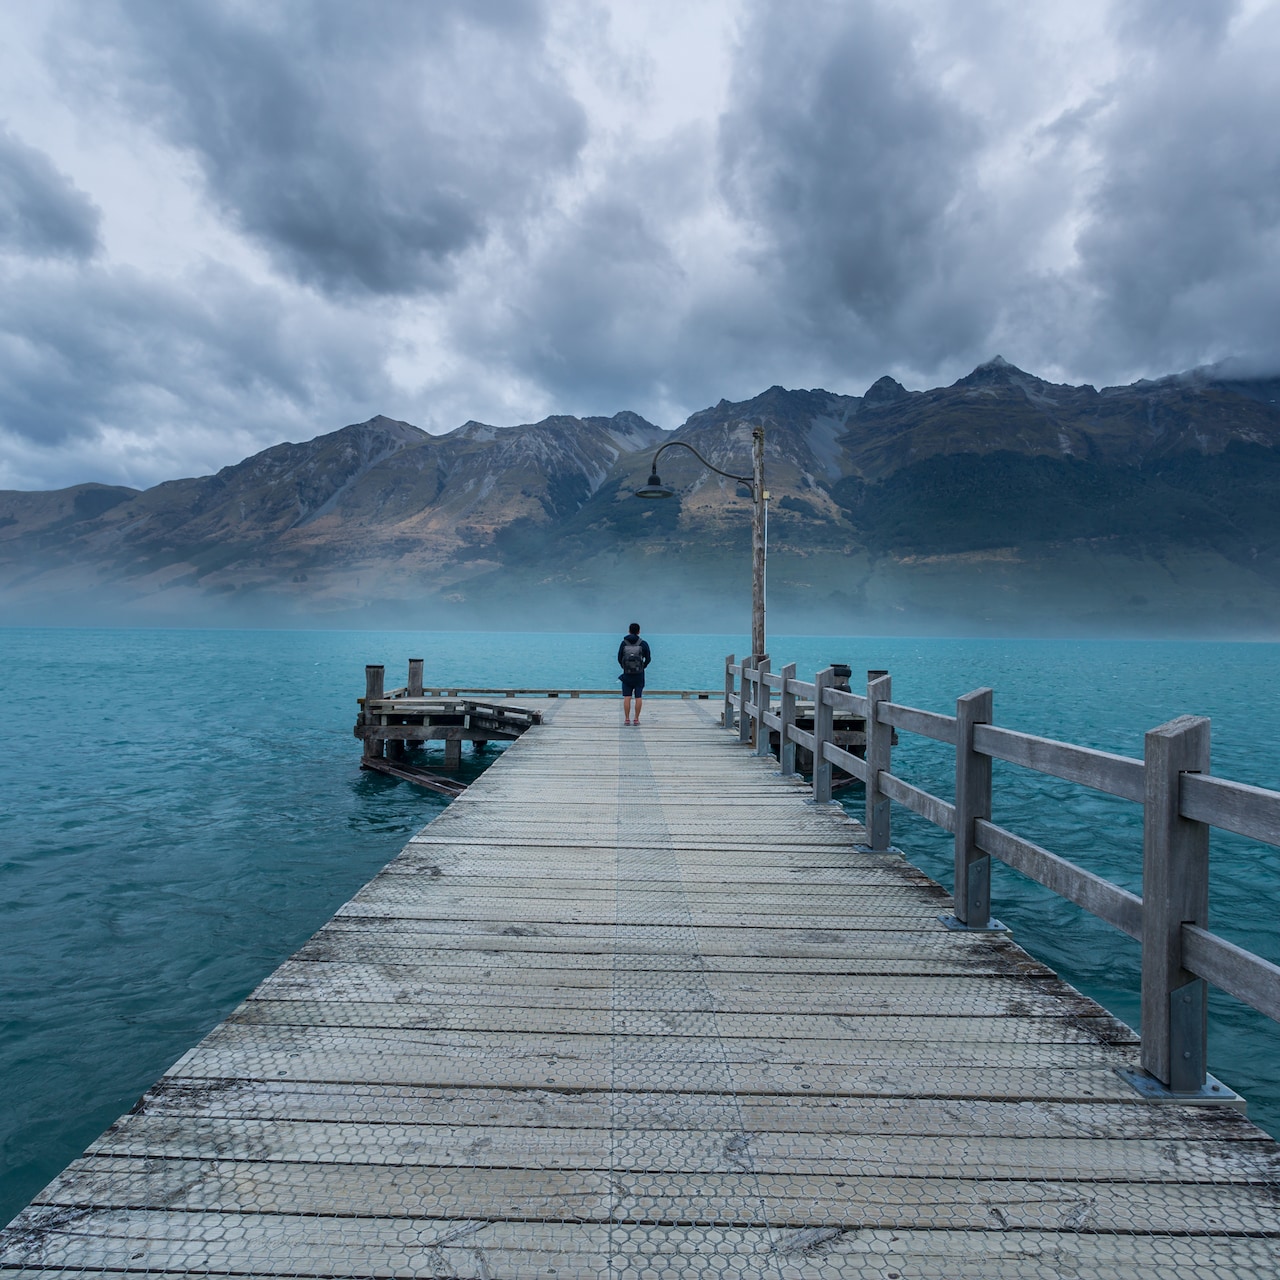 A person stands at the end of a long wooden dock that leads into the sea near a mountain range